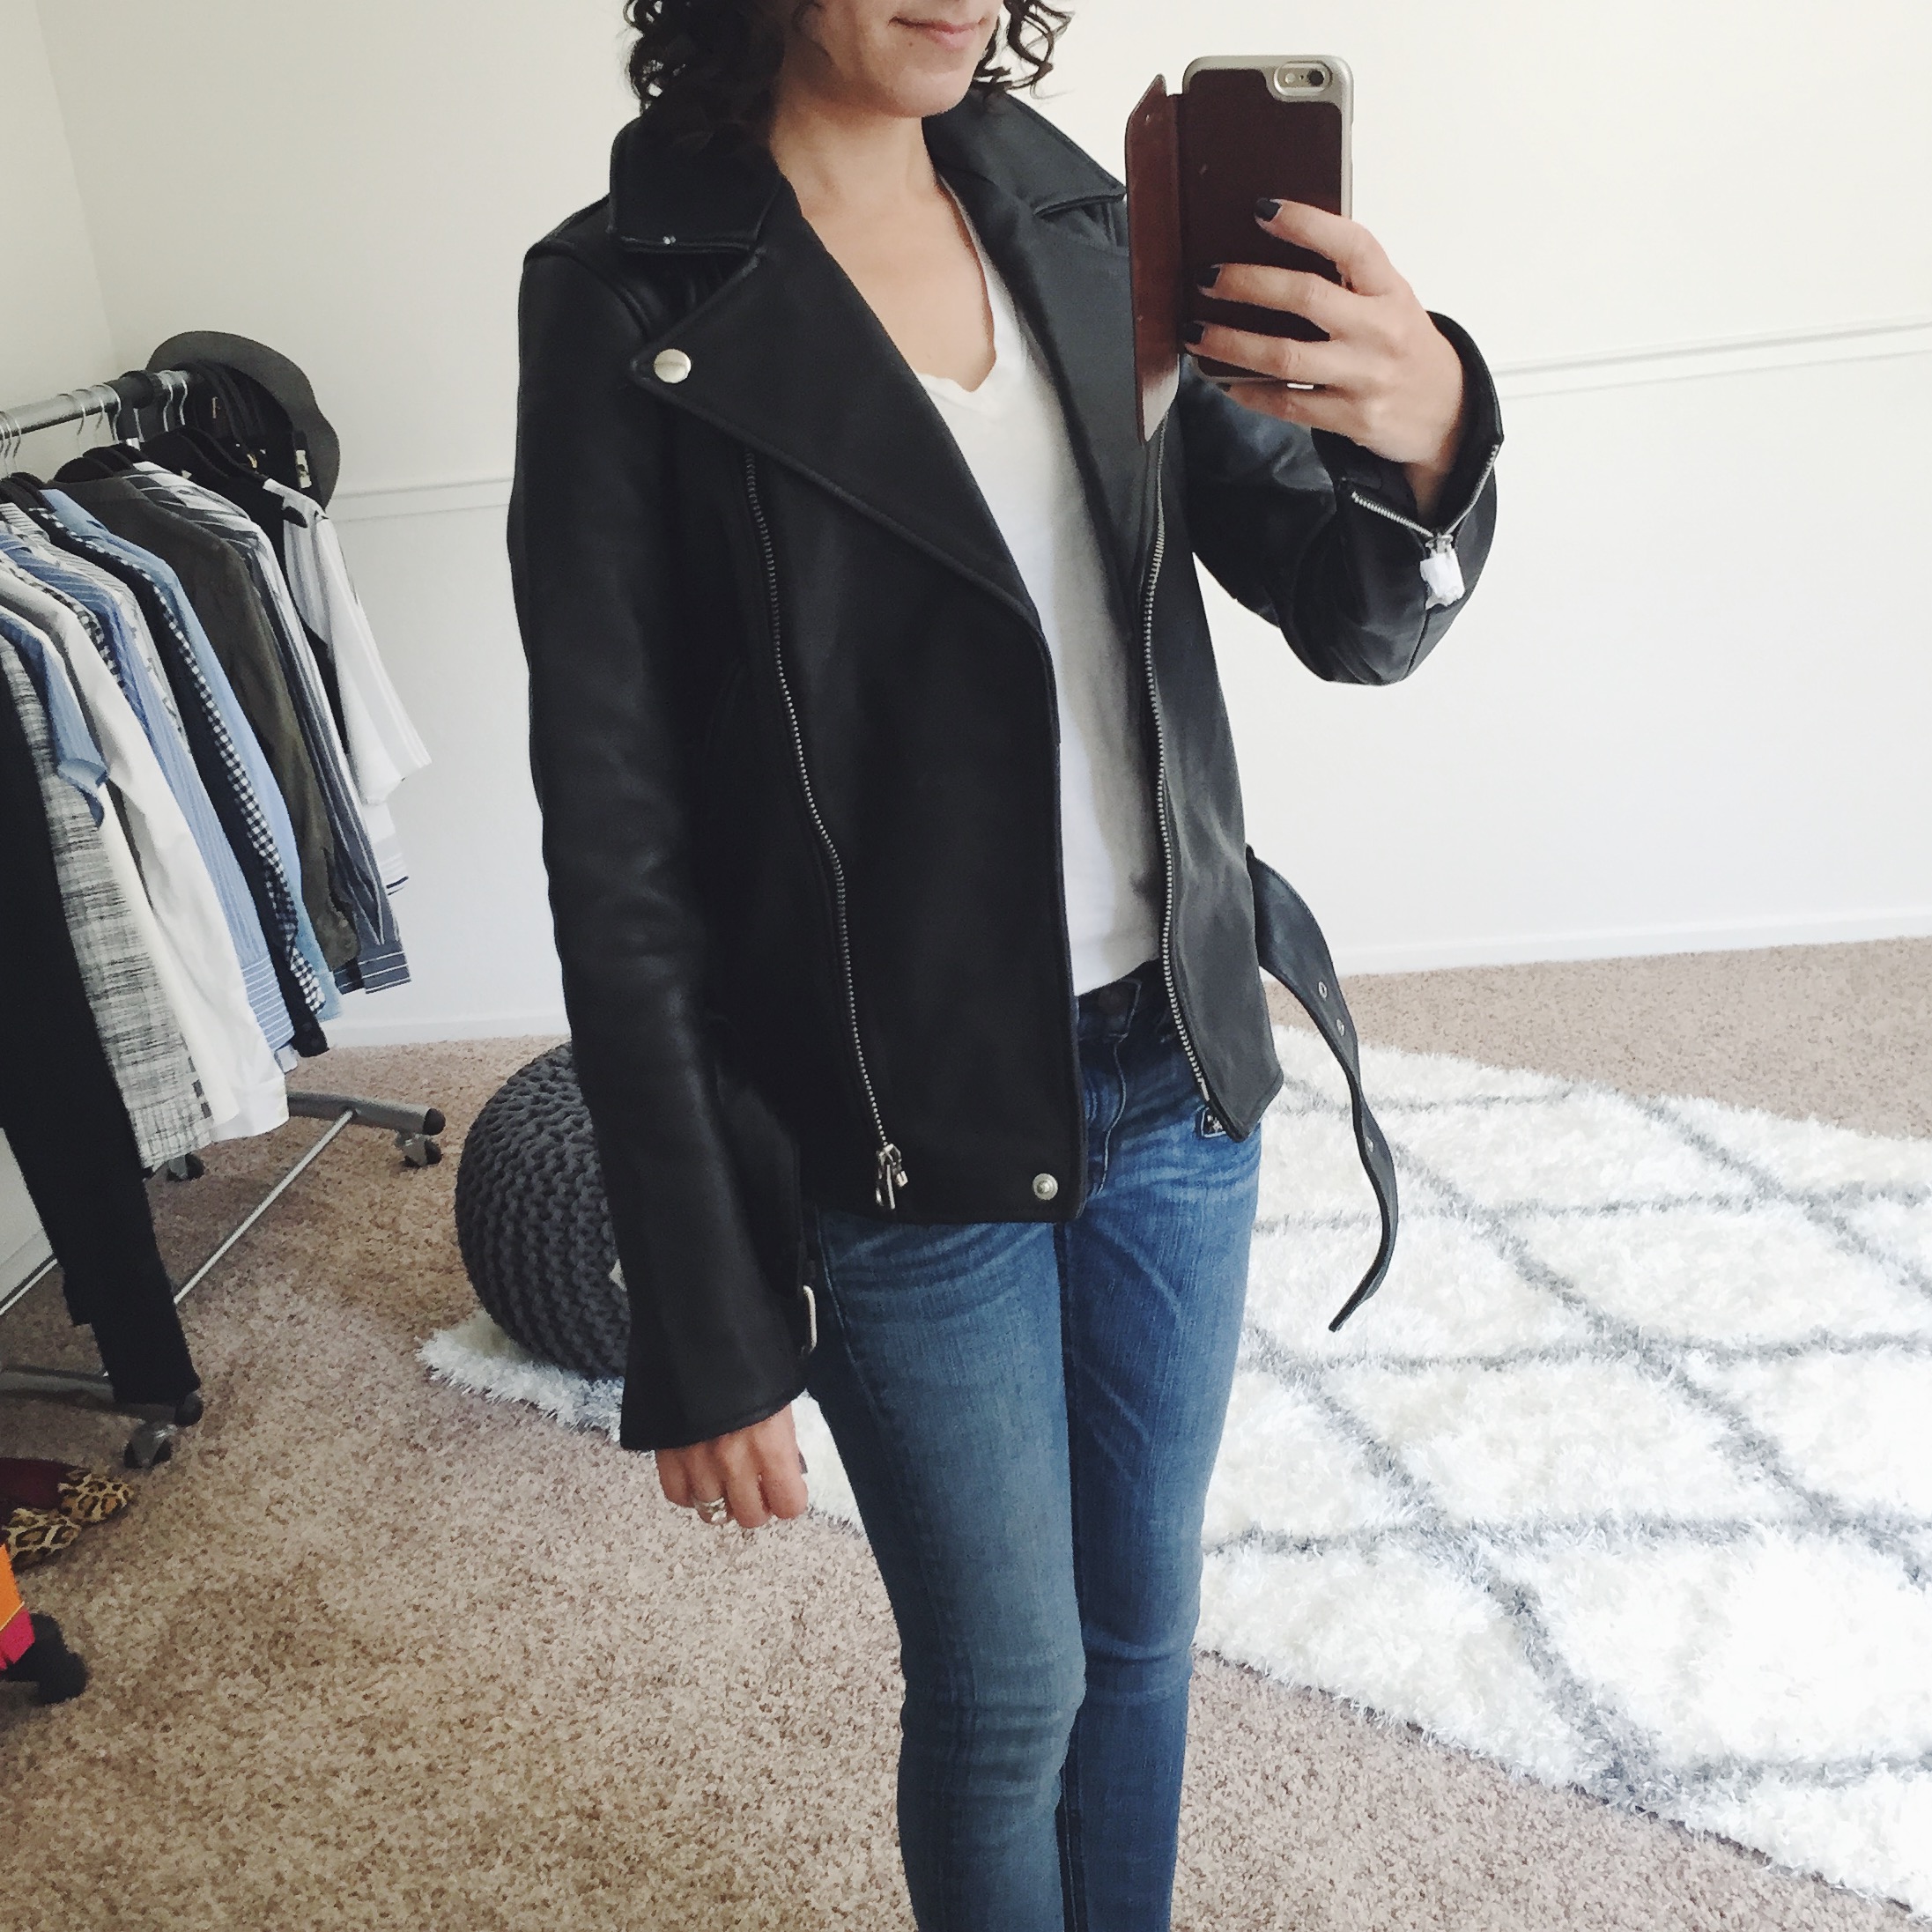 Fit Review Friday – Madewell Leather & Everlane Tee